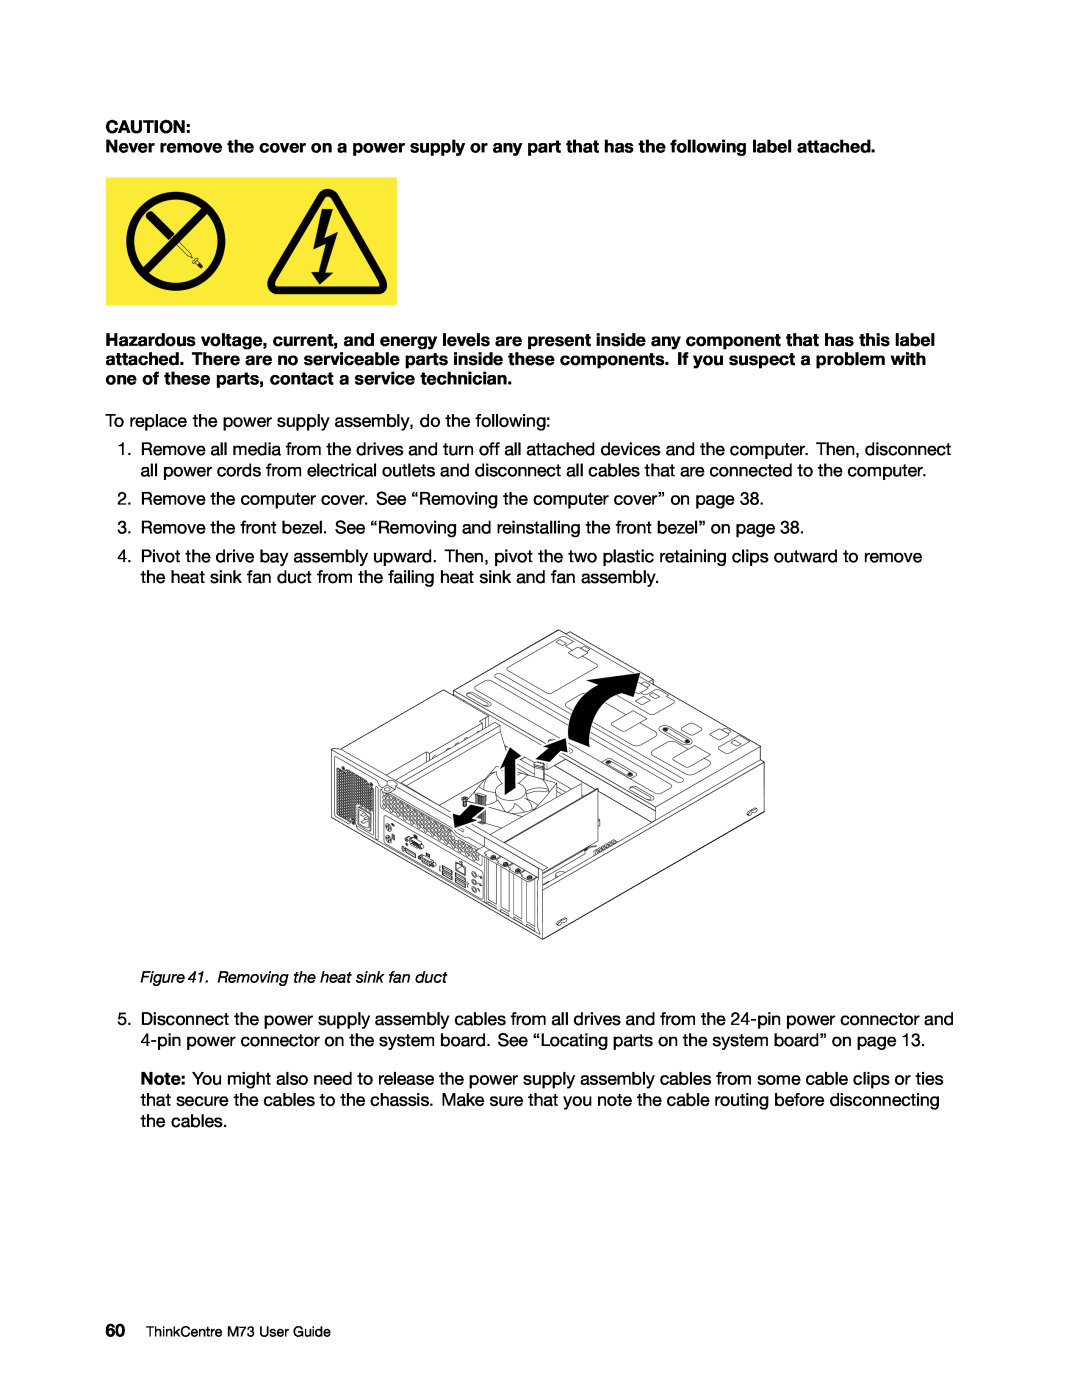 Lenovo manual Removing the heat sink fan duct, ThinkCentre M73 User Guide 